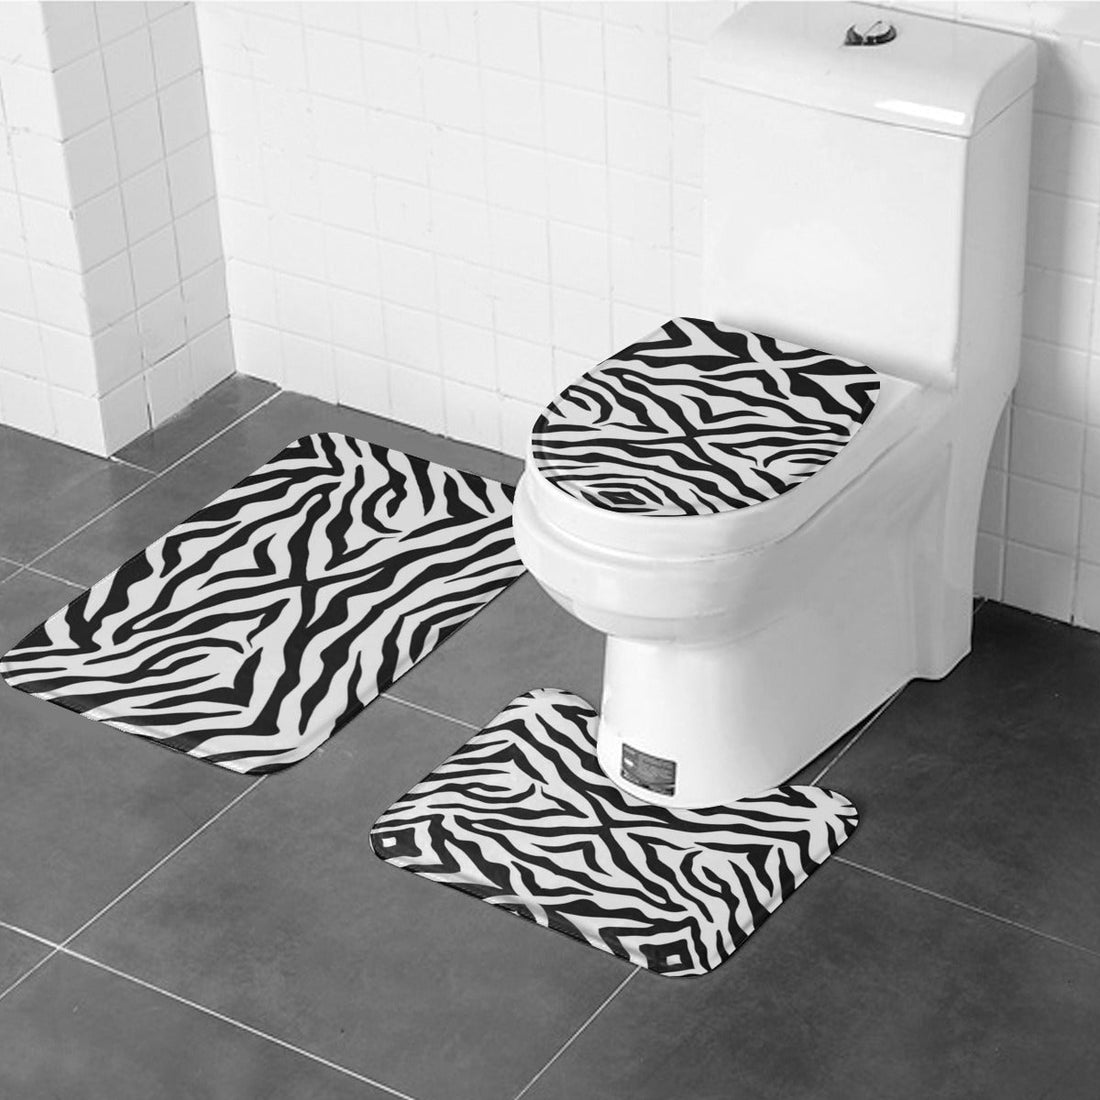 Stylishly Striped Sanctuaries: Elevate Your Bathroom with a Zebra-Inspired Three-Piece Flannel Set in Black and White Home-clothes-jewelry